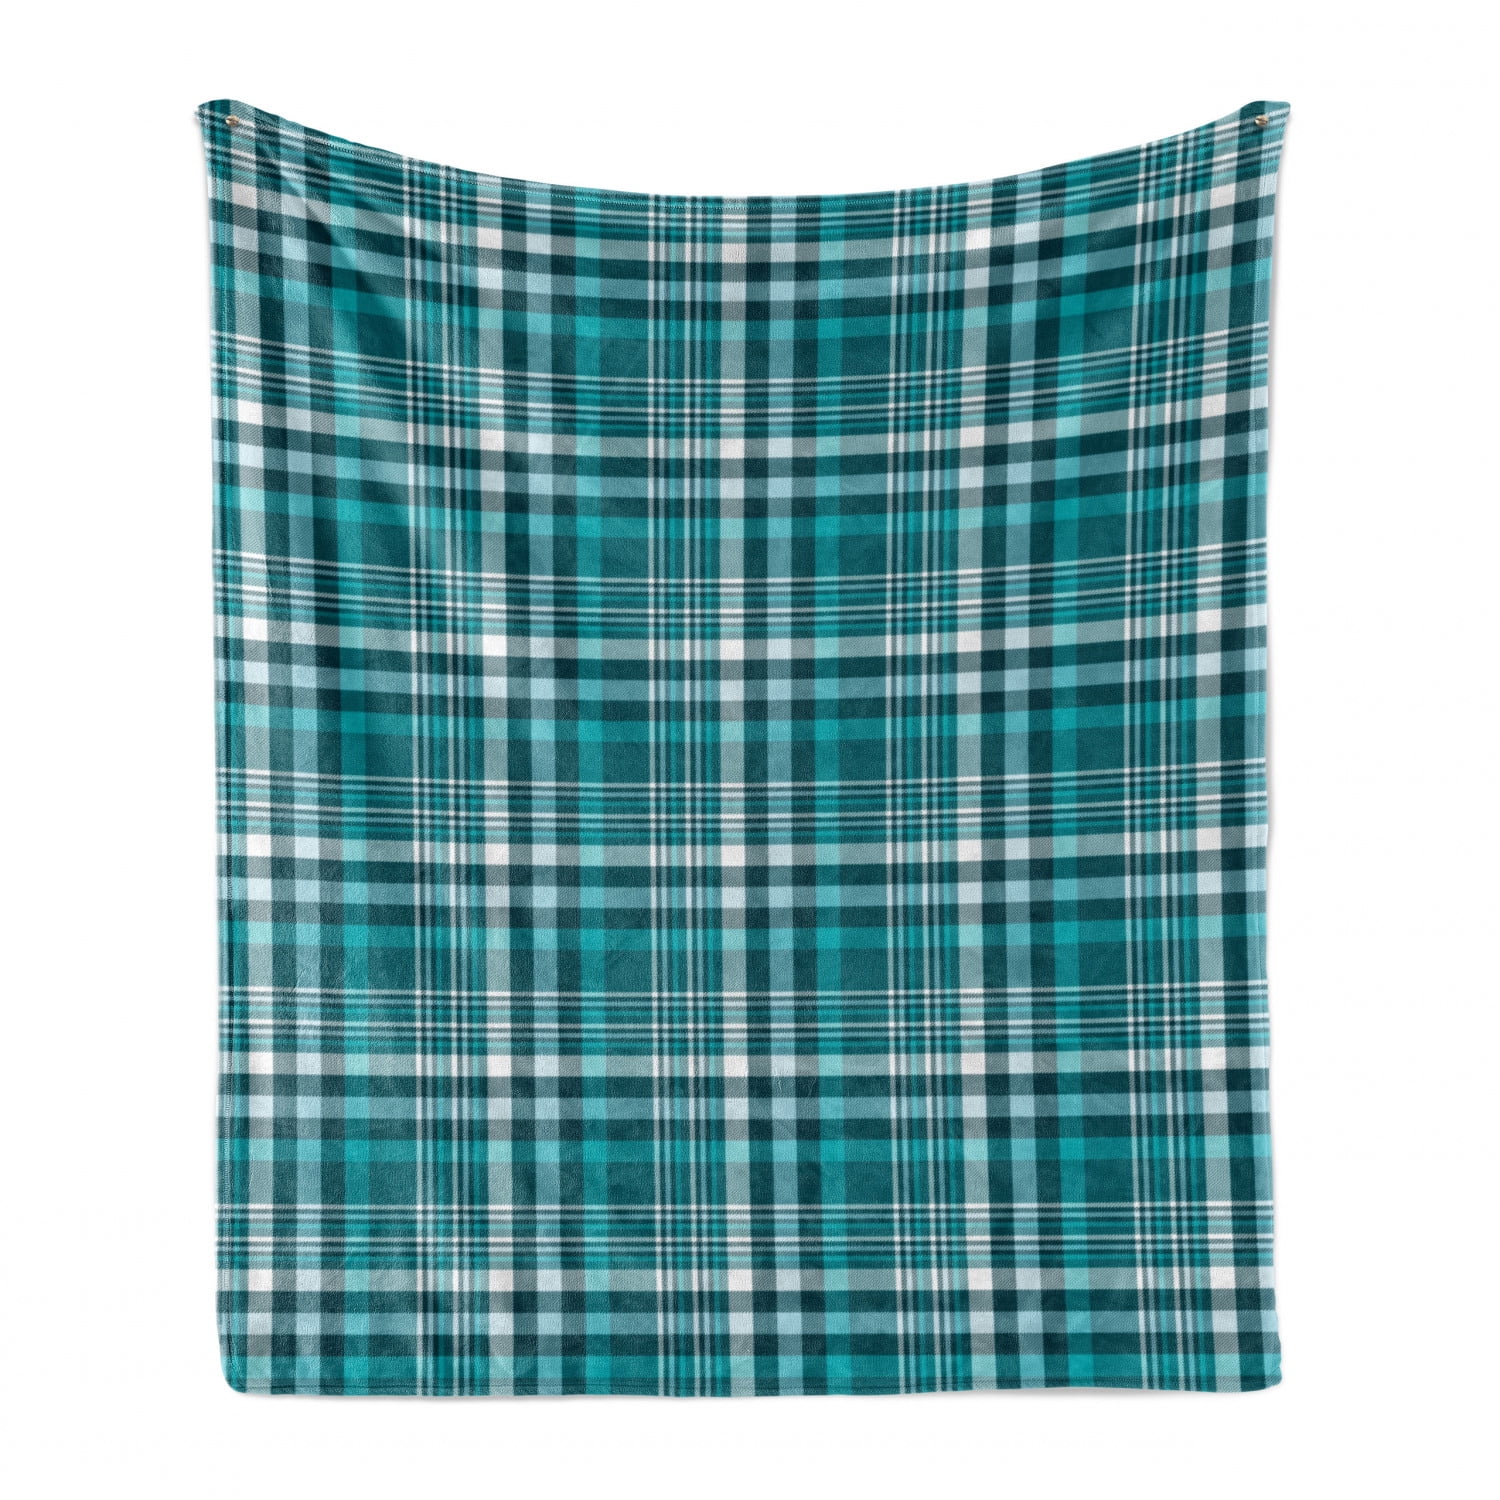 60 x 80 Cozy Plush for Indoor and Outdoor Use Sky Blue Blue Ambesonne Plaid Soft Flannel Fleece Throw Blanket Diagonal Order Squared Check Classic British Style